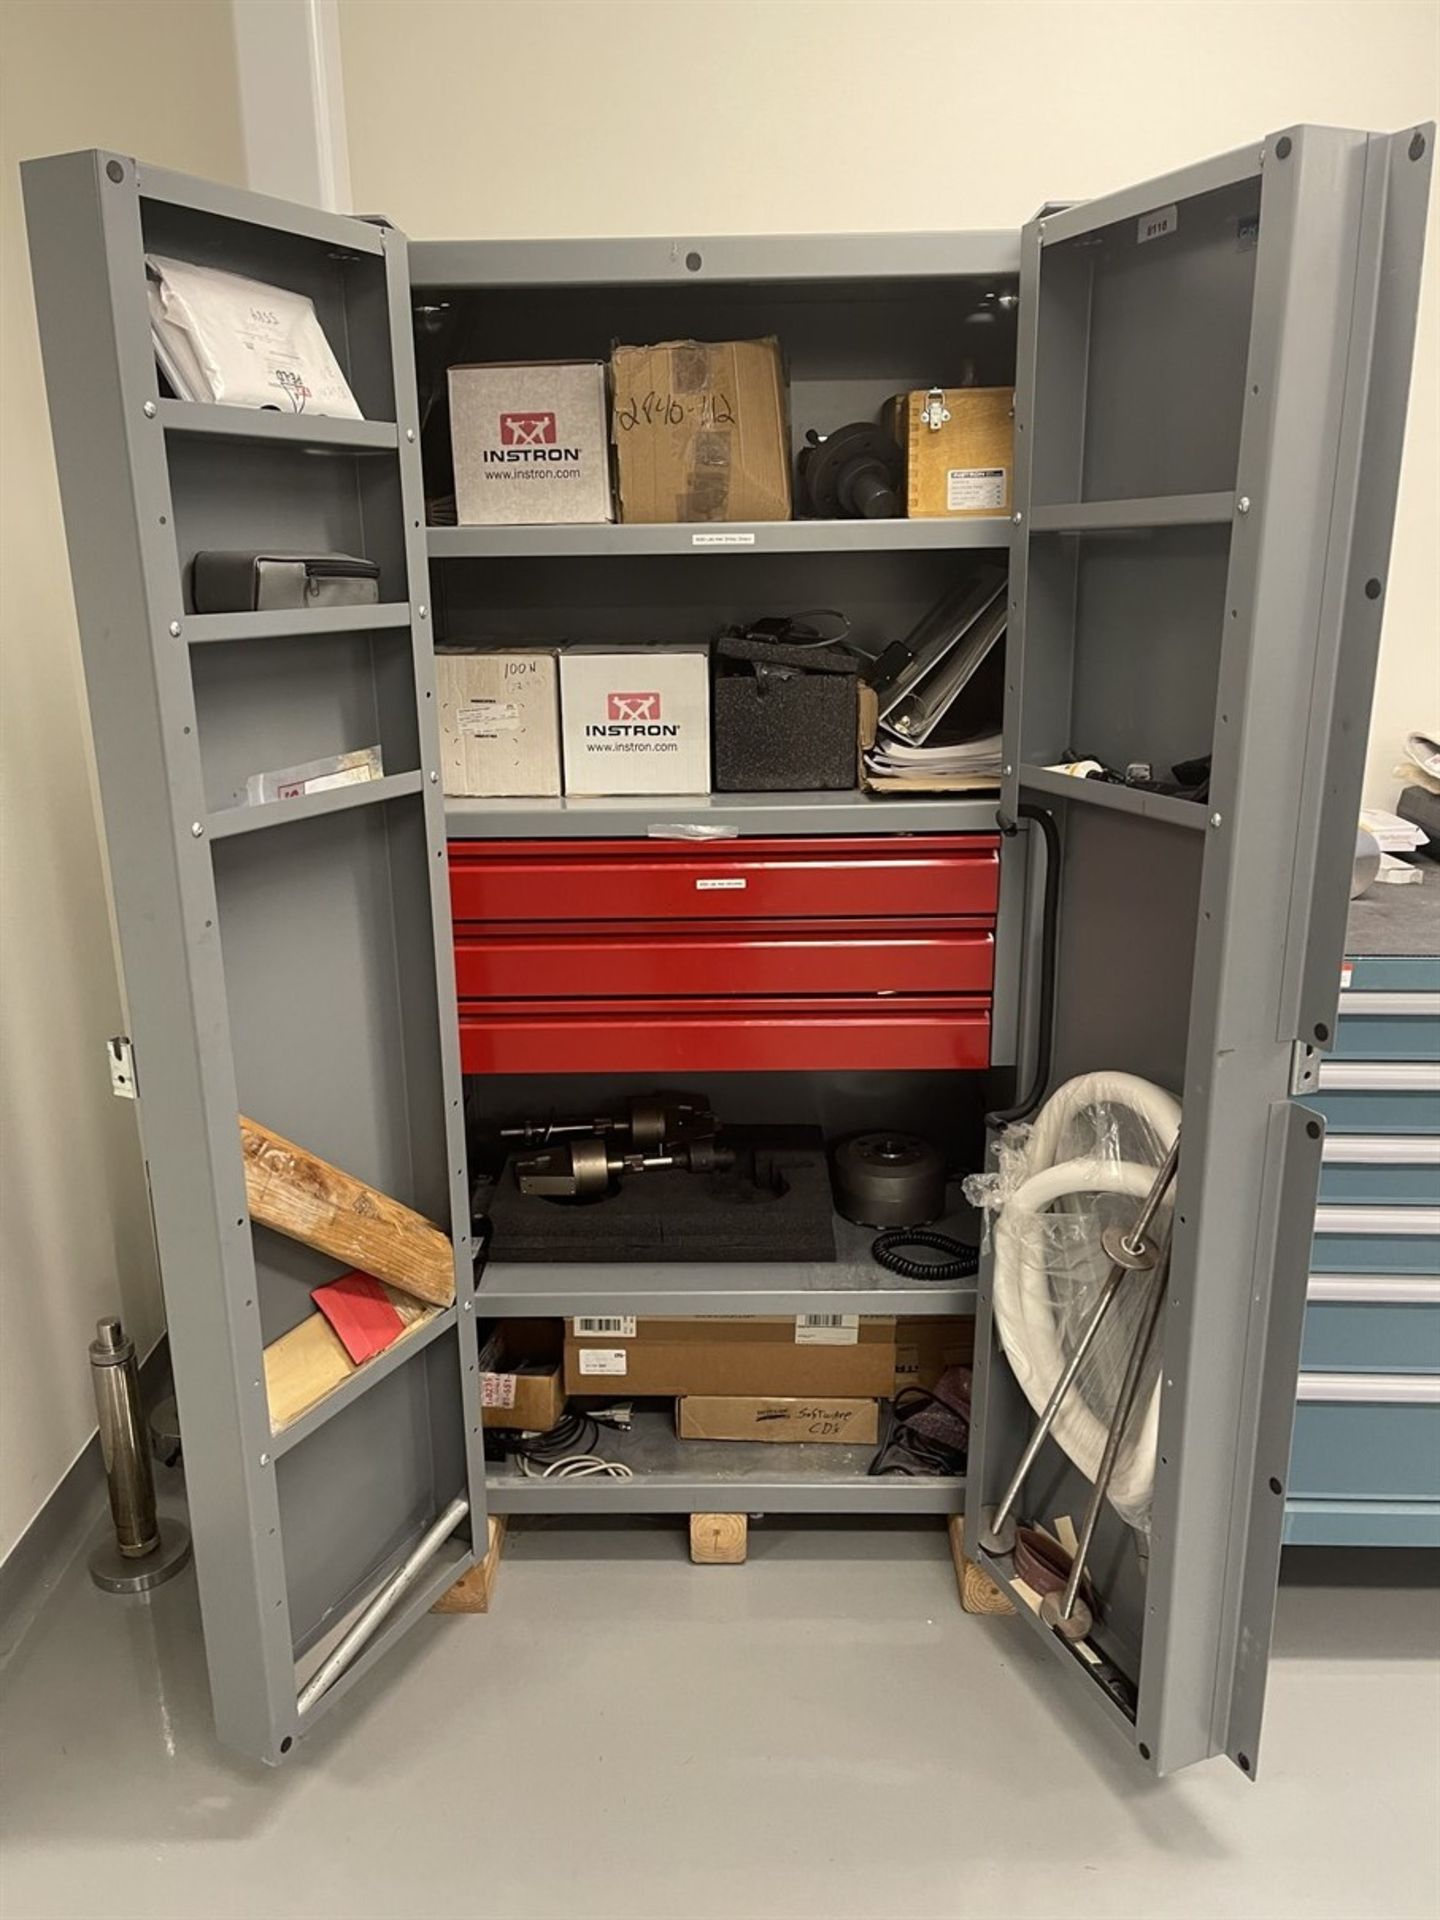 CH Heavy Duty Shop Cabinet, (No Contents) (Rubber Lab) - Image 2 of 2